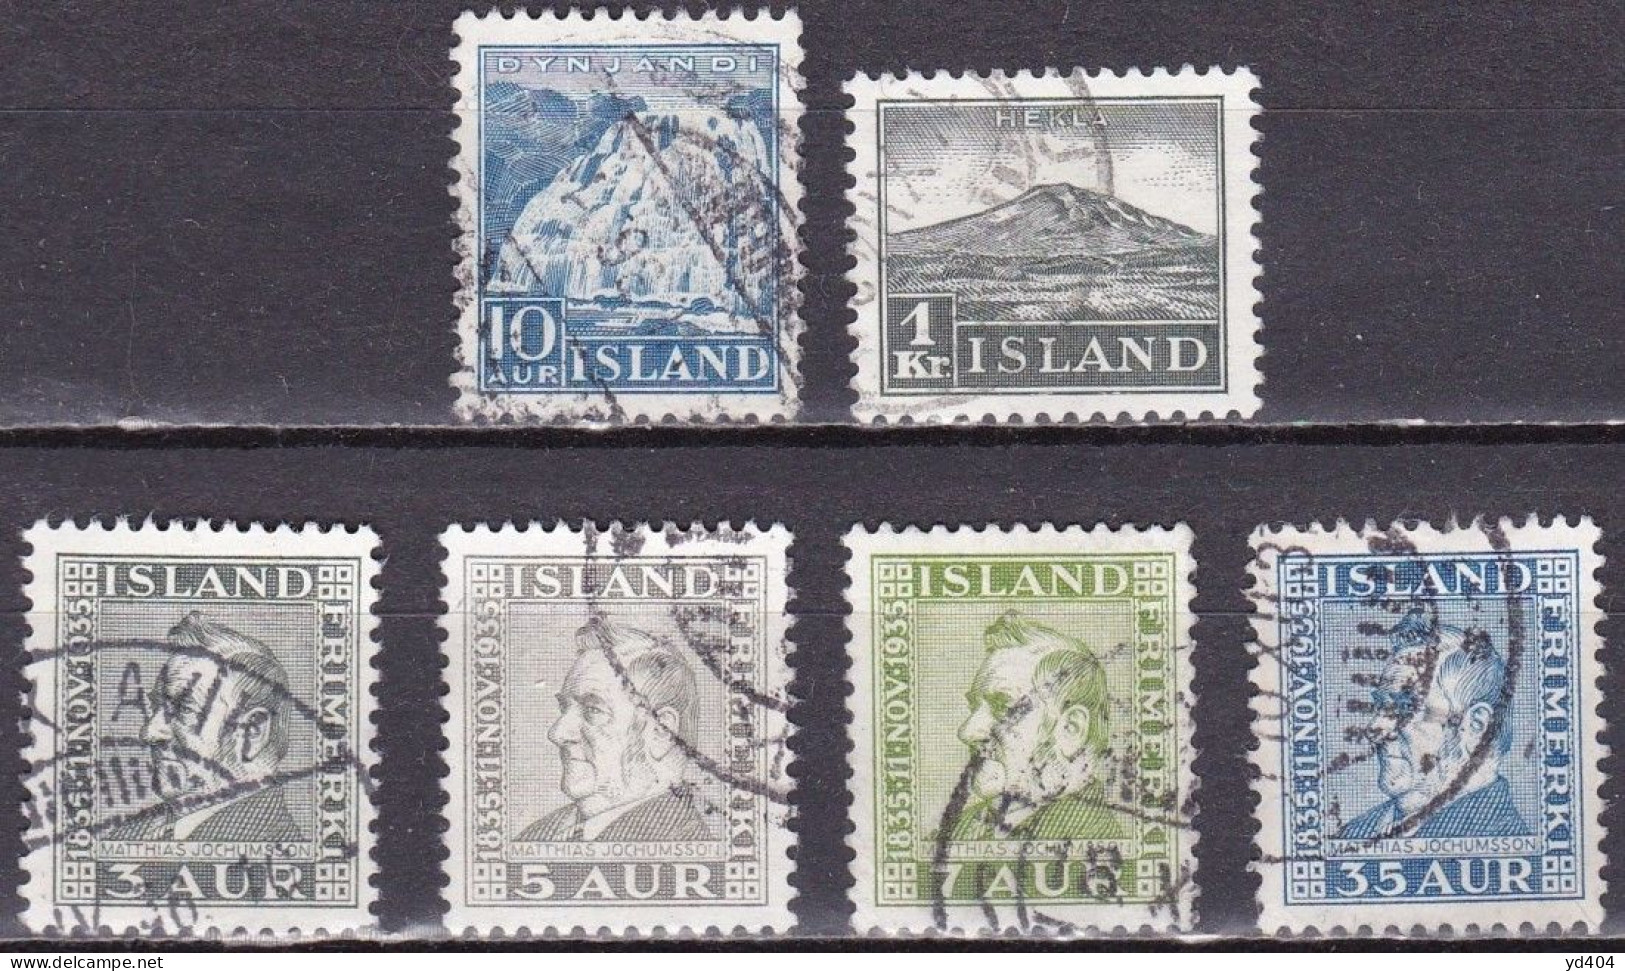 IS032 – ISLANDE – ICELAND – 1935 – FULL YEAR SET – SG # 214/9 USED 11 € - Used Stamps